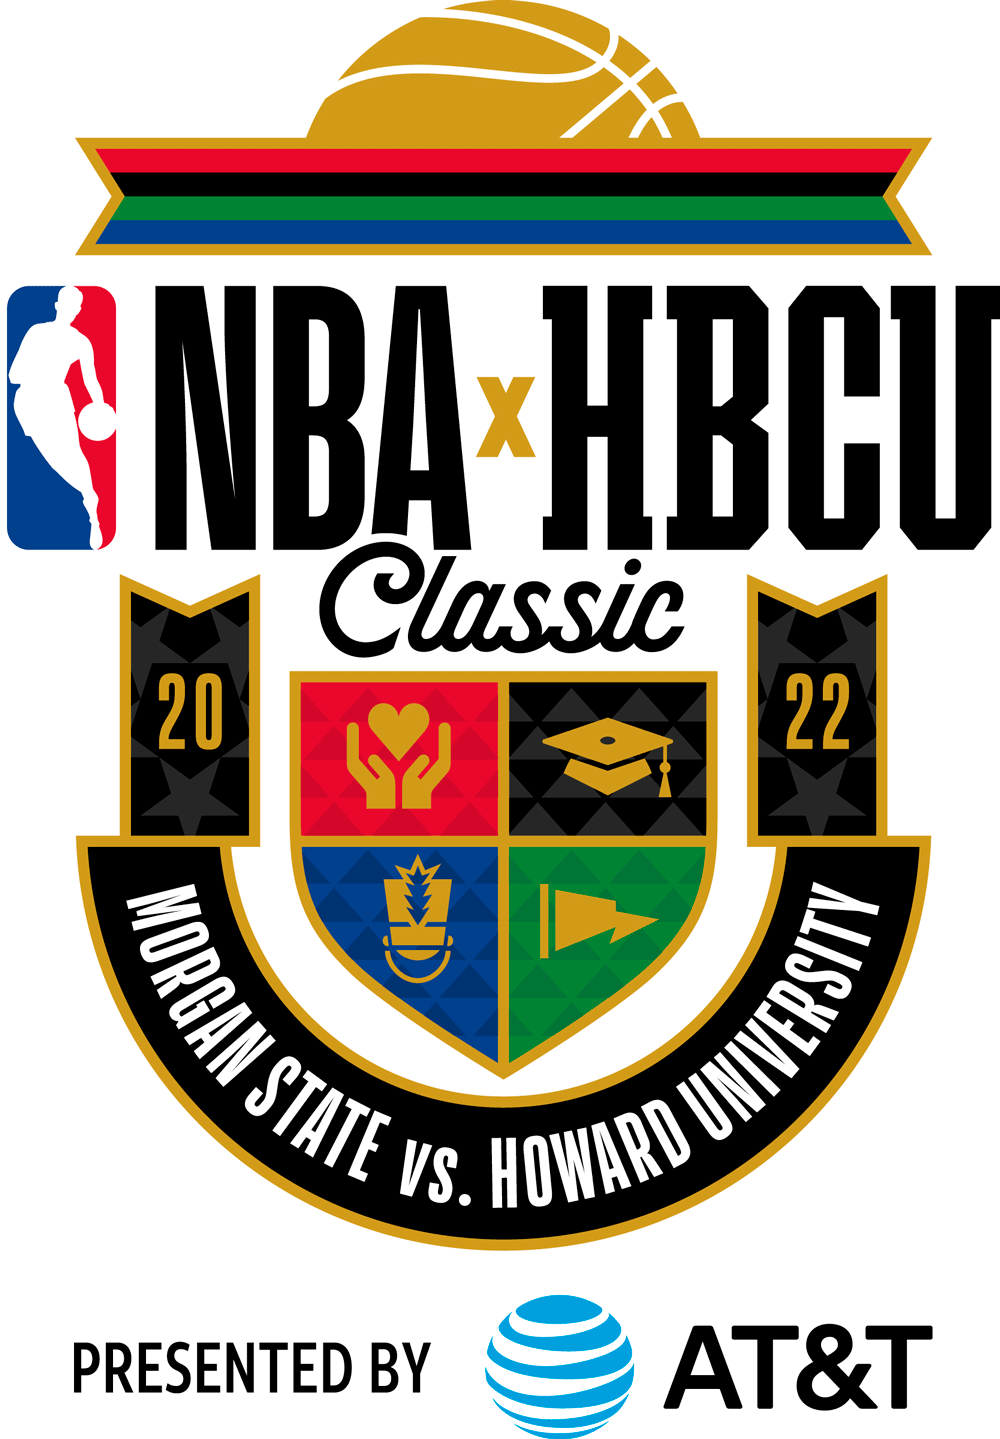 AT&T to serve as presenting partner of NBA HBCU Classic for Second Year